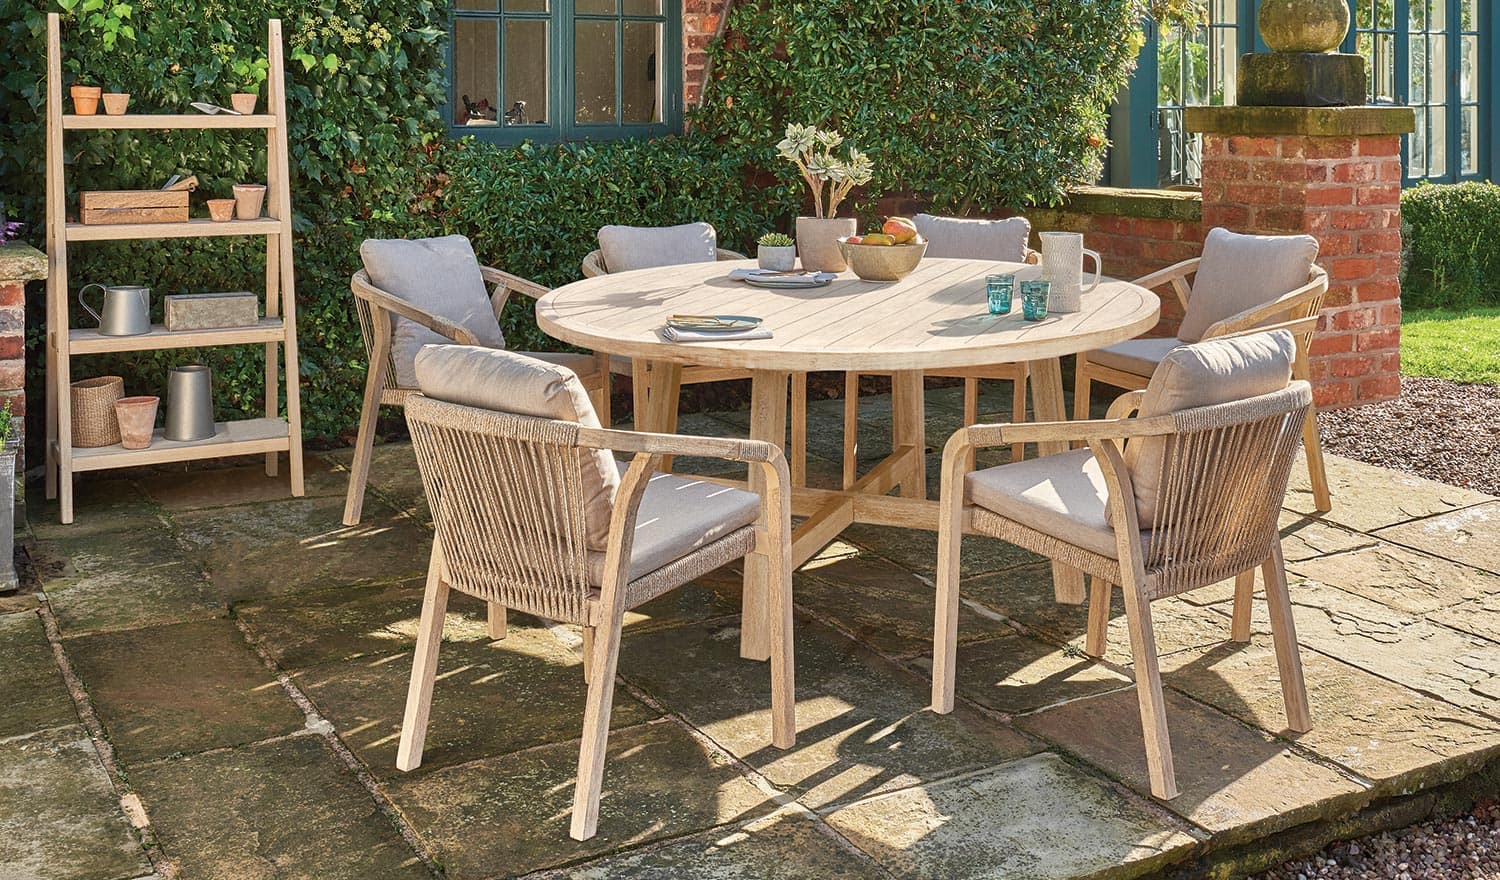 Cora 150cm Round Dining Table 6 Seater, Round Wood Garden Table And Chairs